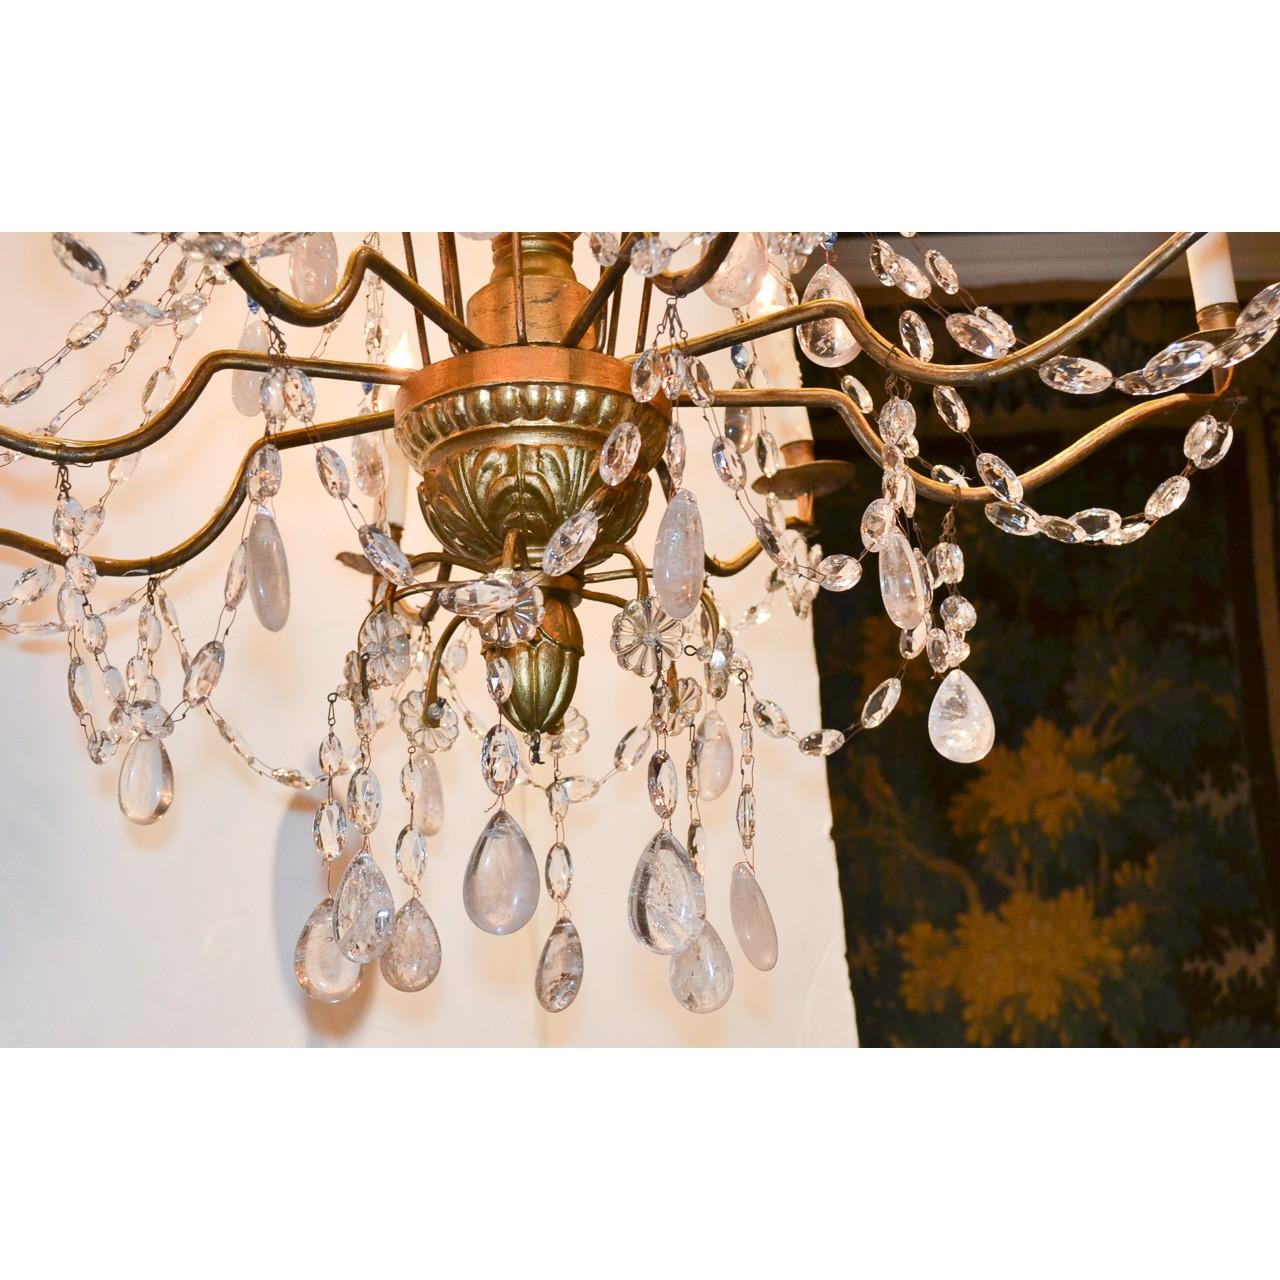 Carved 18th Century Italian Giltwood and Crystal Chandelier